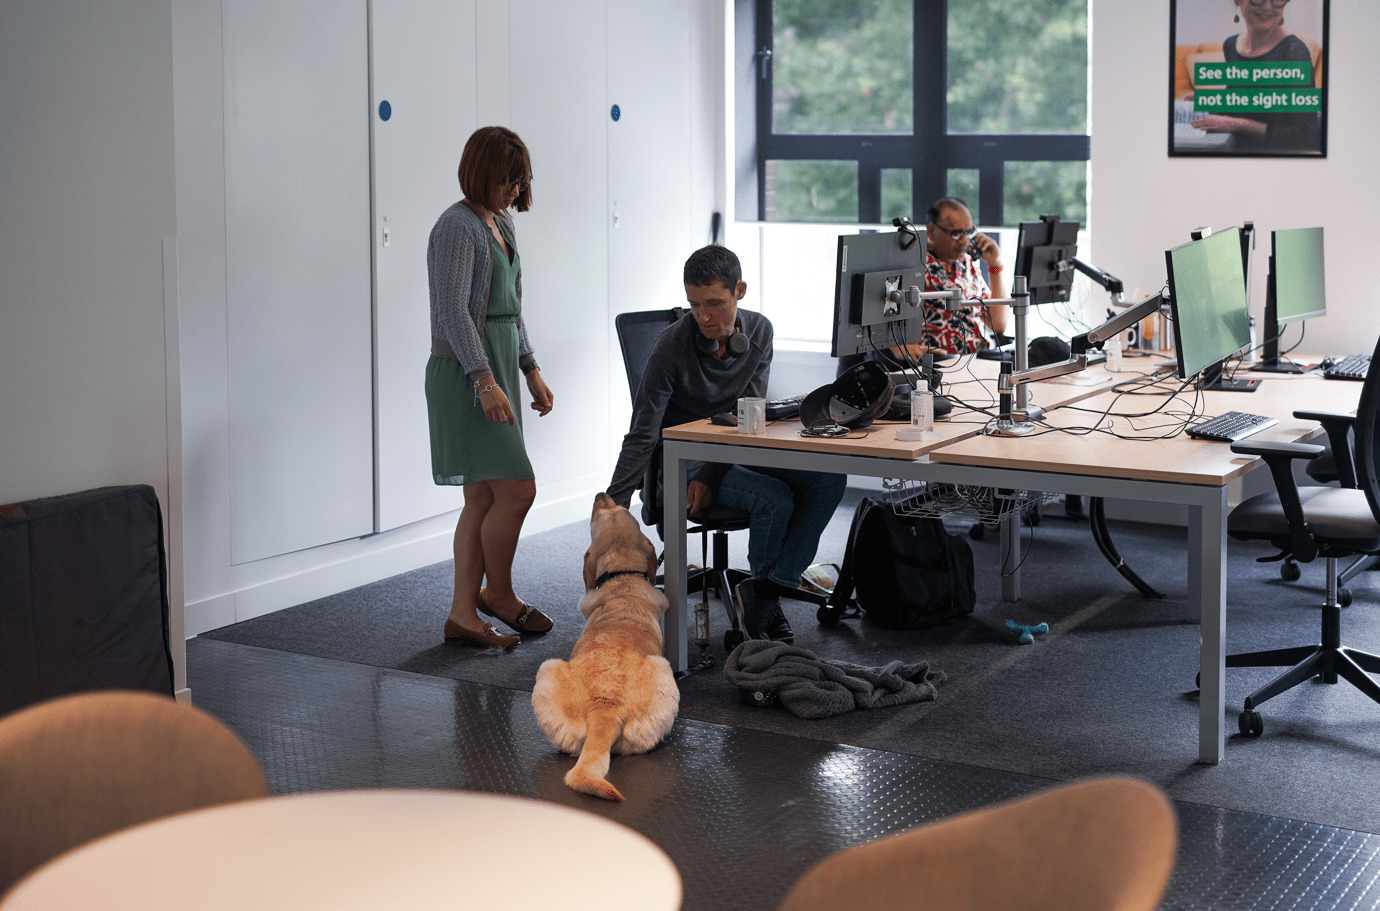 Two people in an office and a guide dog sitting on the floor.